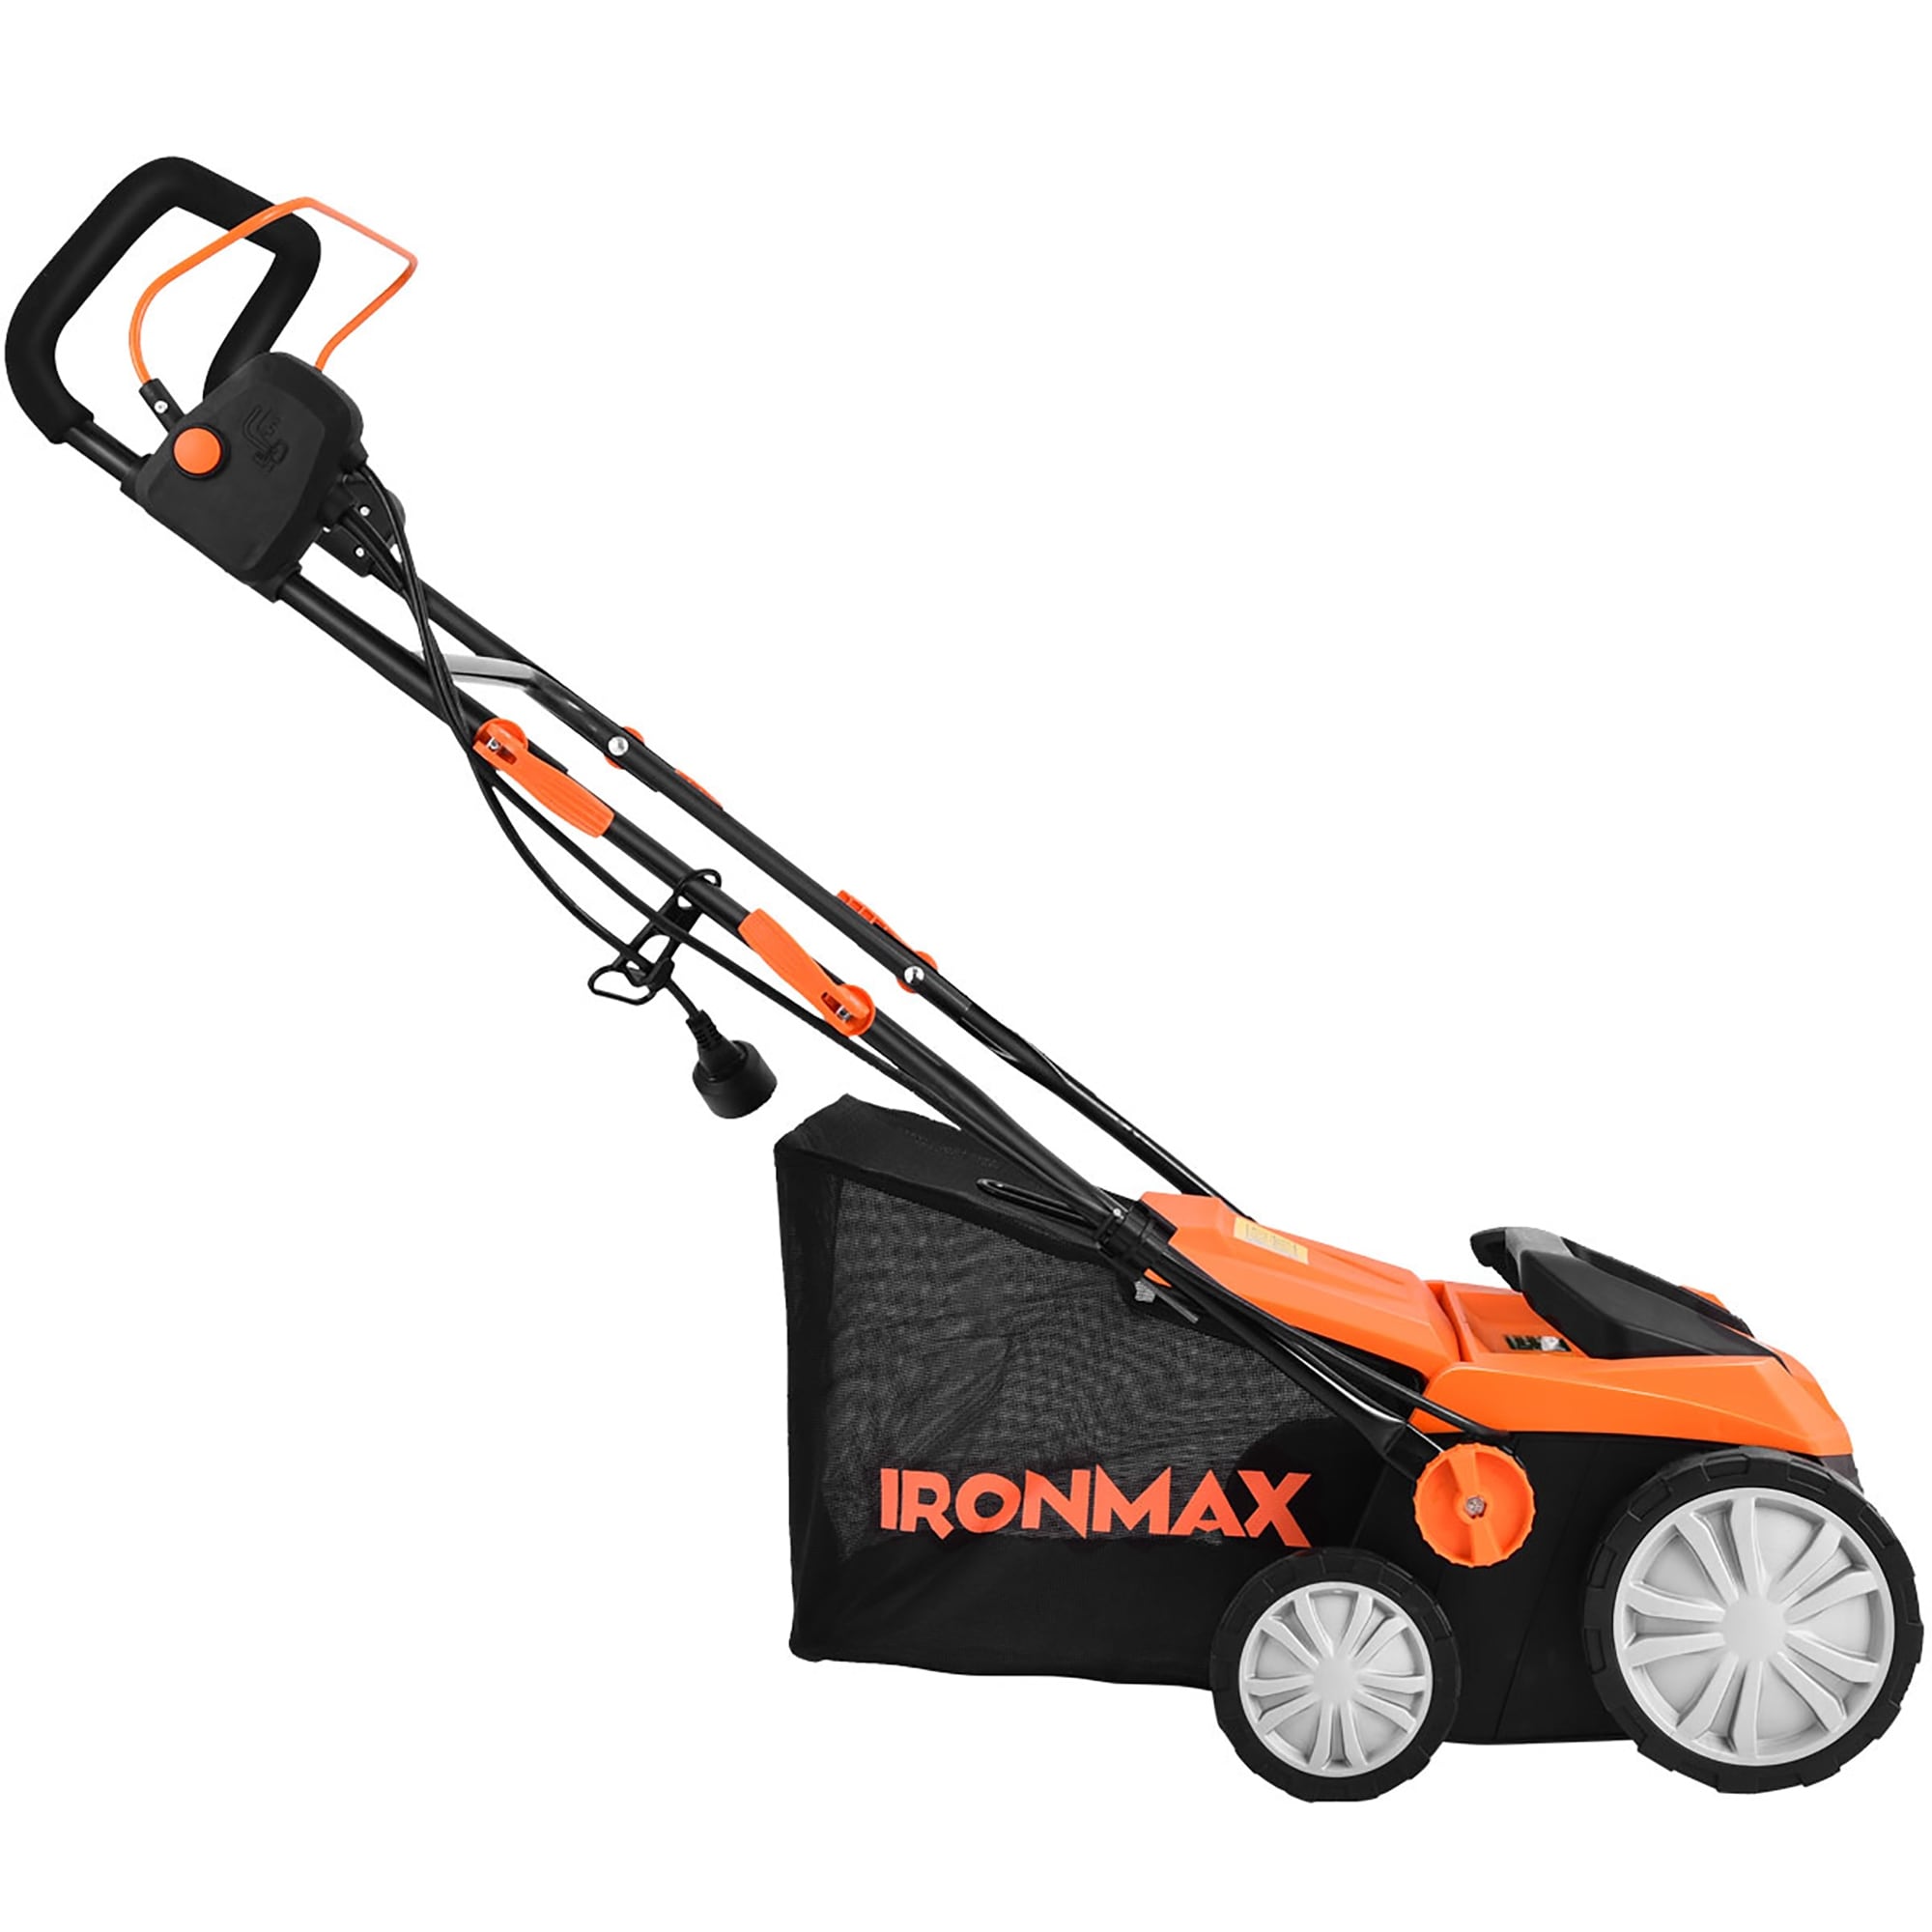 https://ak1.ostkcdn.com/images/products/is/images/direct/a0c5bbdbb4aeee699e41f991bf645590723f86ad/IronMax-13Amp-Corded-Scarifier-15%27%27-Electric-Lawn-Dethatcher-w-50L.jpg